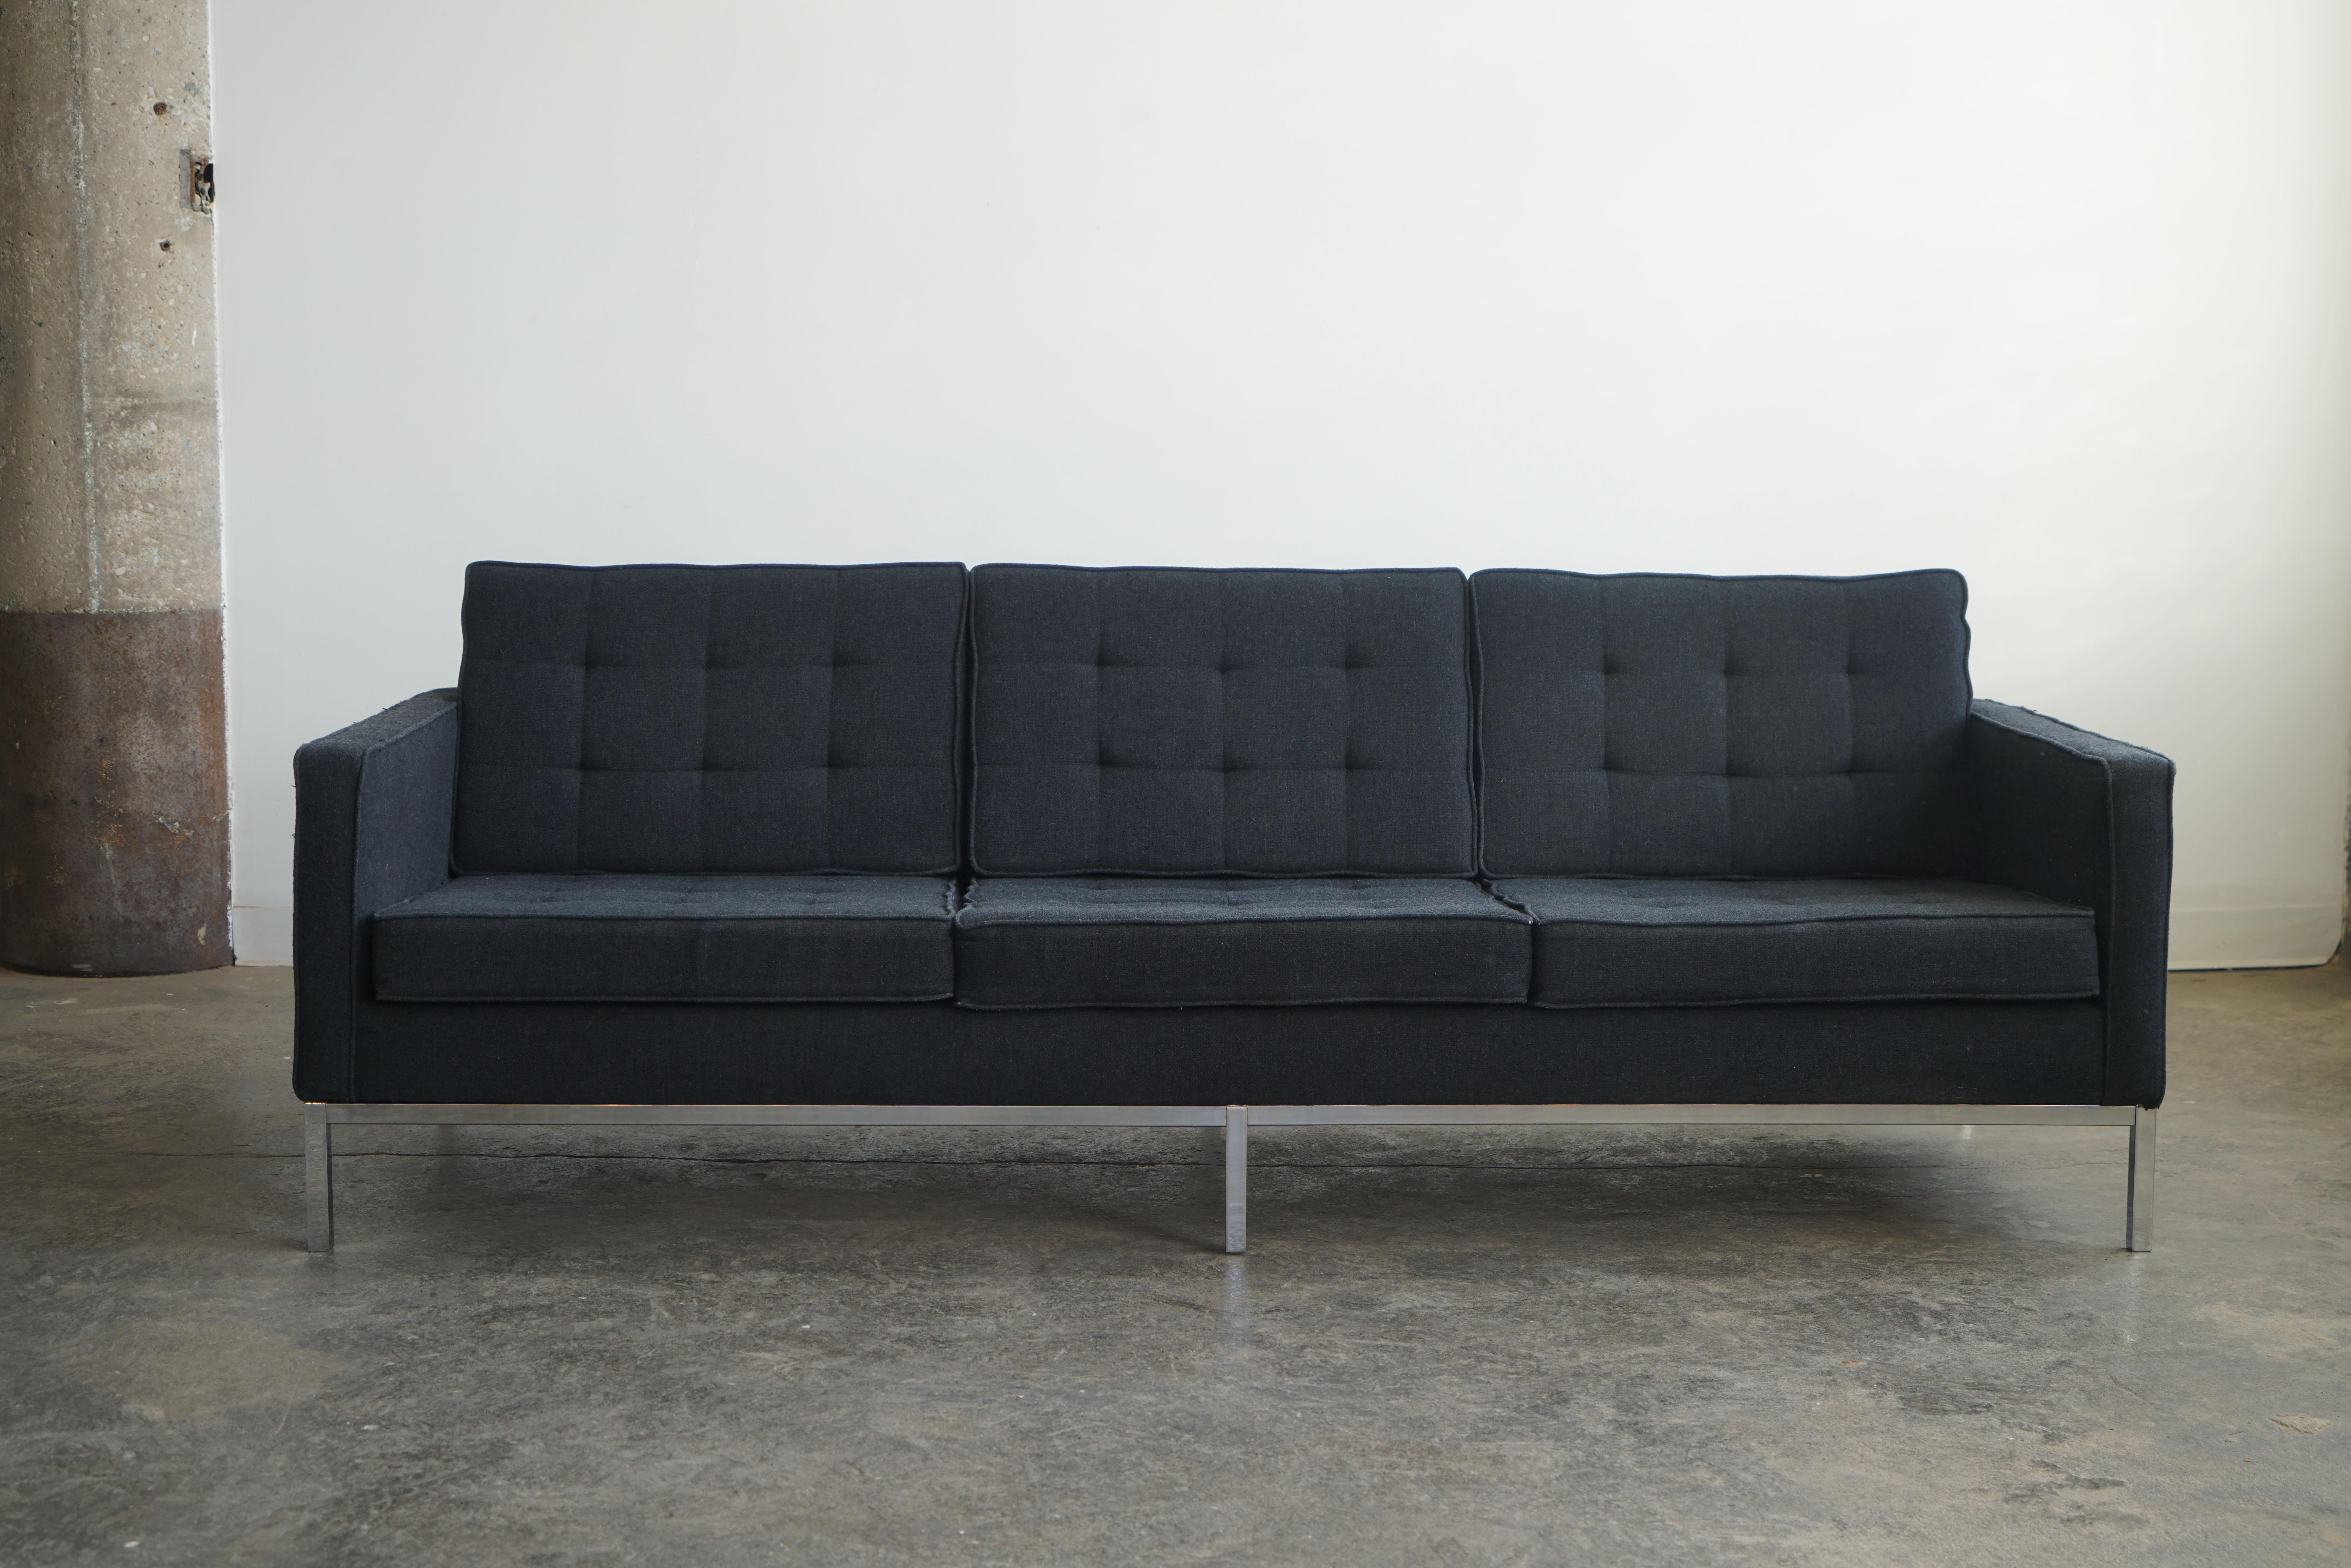 Attributed to Florence Knoll
Three-seat sofa in black upholstery.
Circa late 20th or 21st century.
84.5